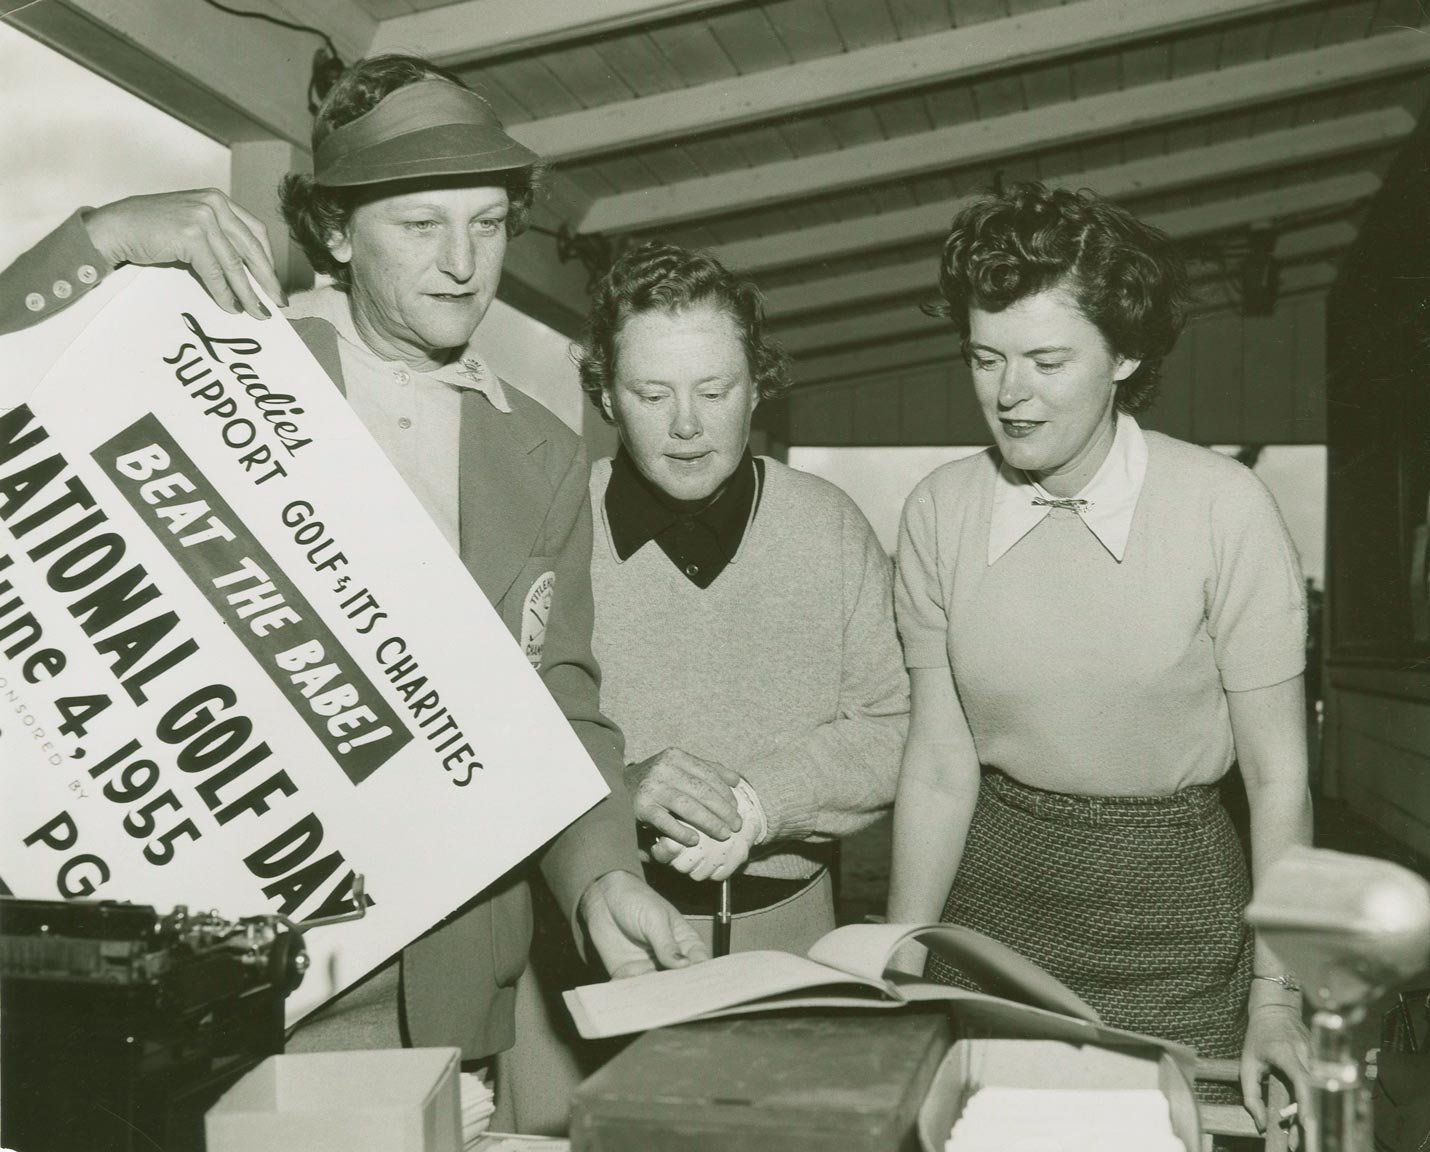 (Pictured left) Babe Zaharias was one of the LPGA Tour’s most popular players. She had a powerful game and equally powerful personality that drew large galleries wherever she played. 